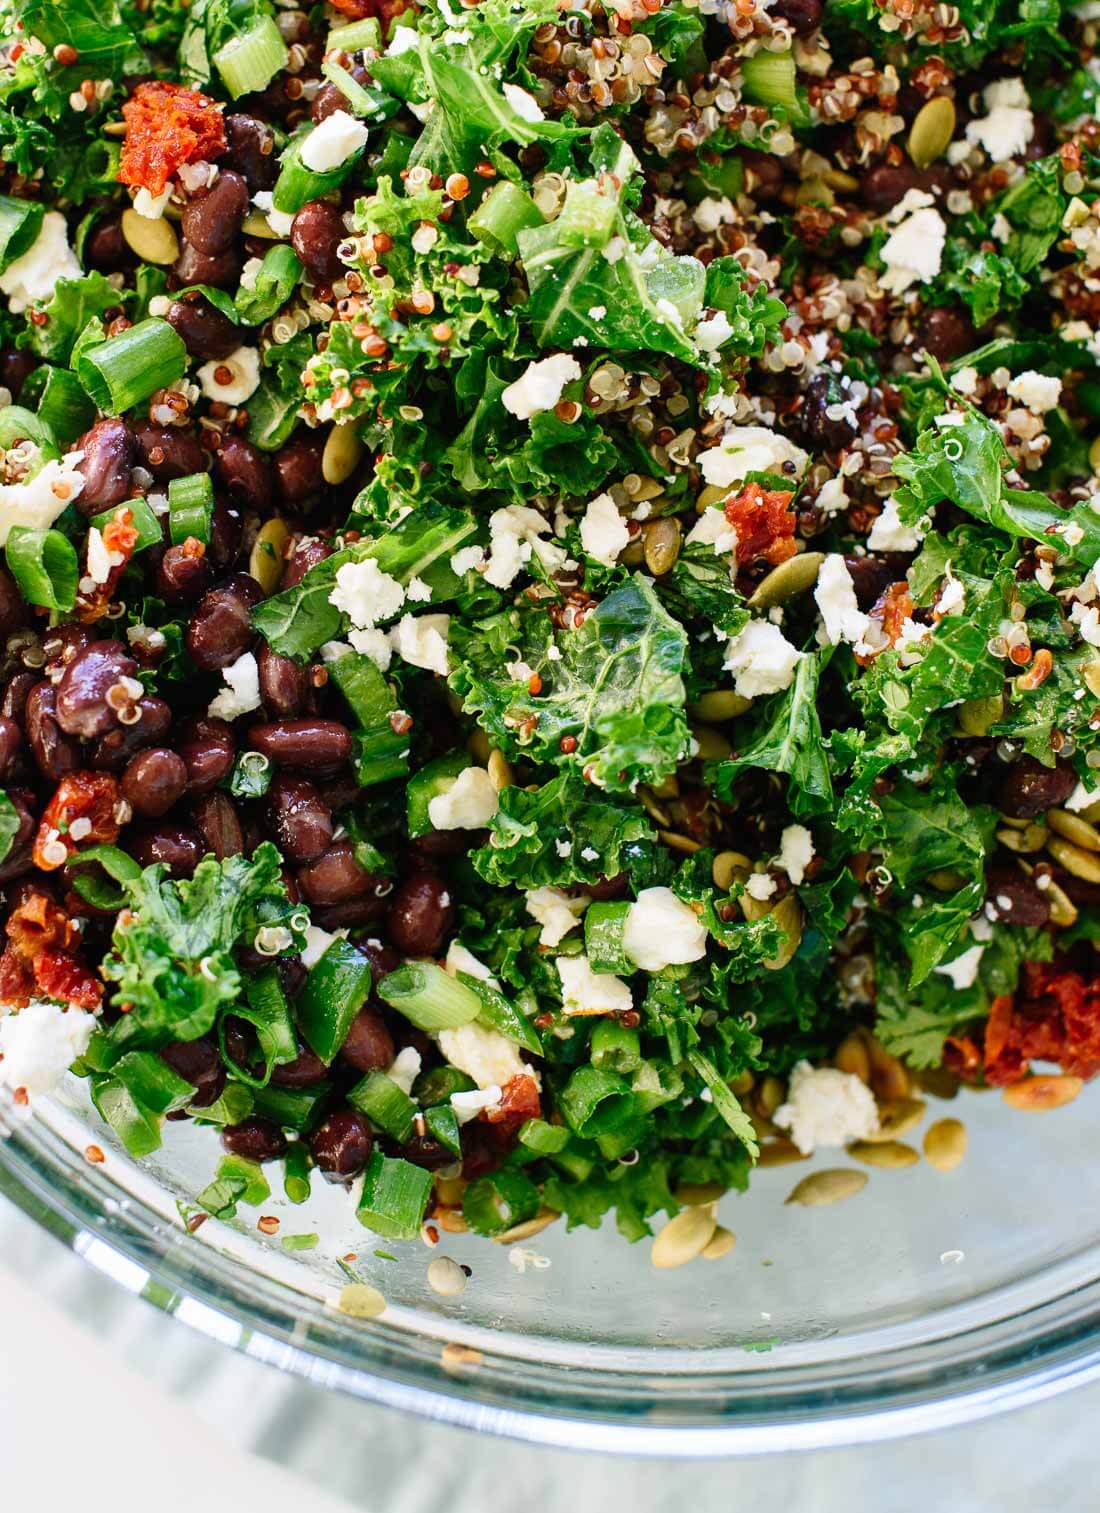 Healthy kale and quinoa salad recipe with Mexican flavors, including black beans, pepitas, and a cumin-lime dressing. Gluten free and easily vegan! cookieandkate.com